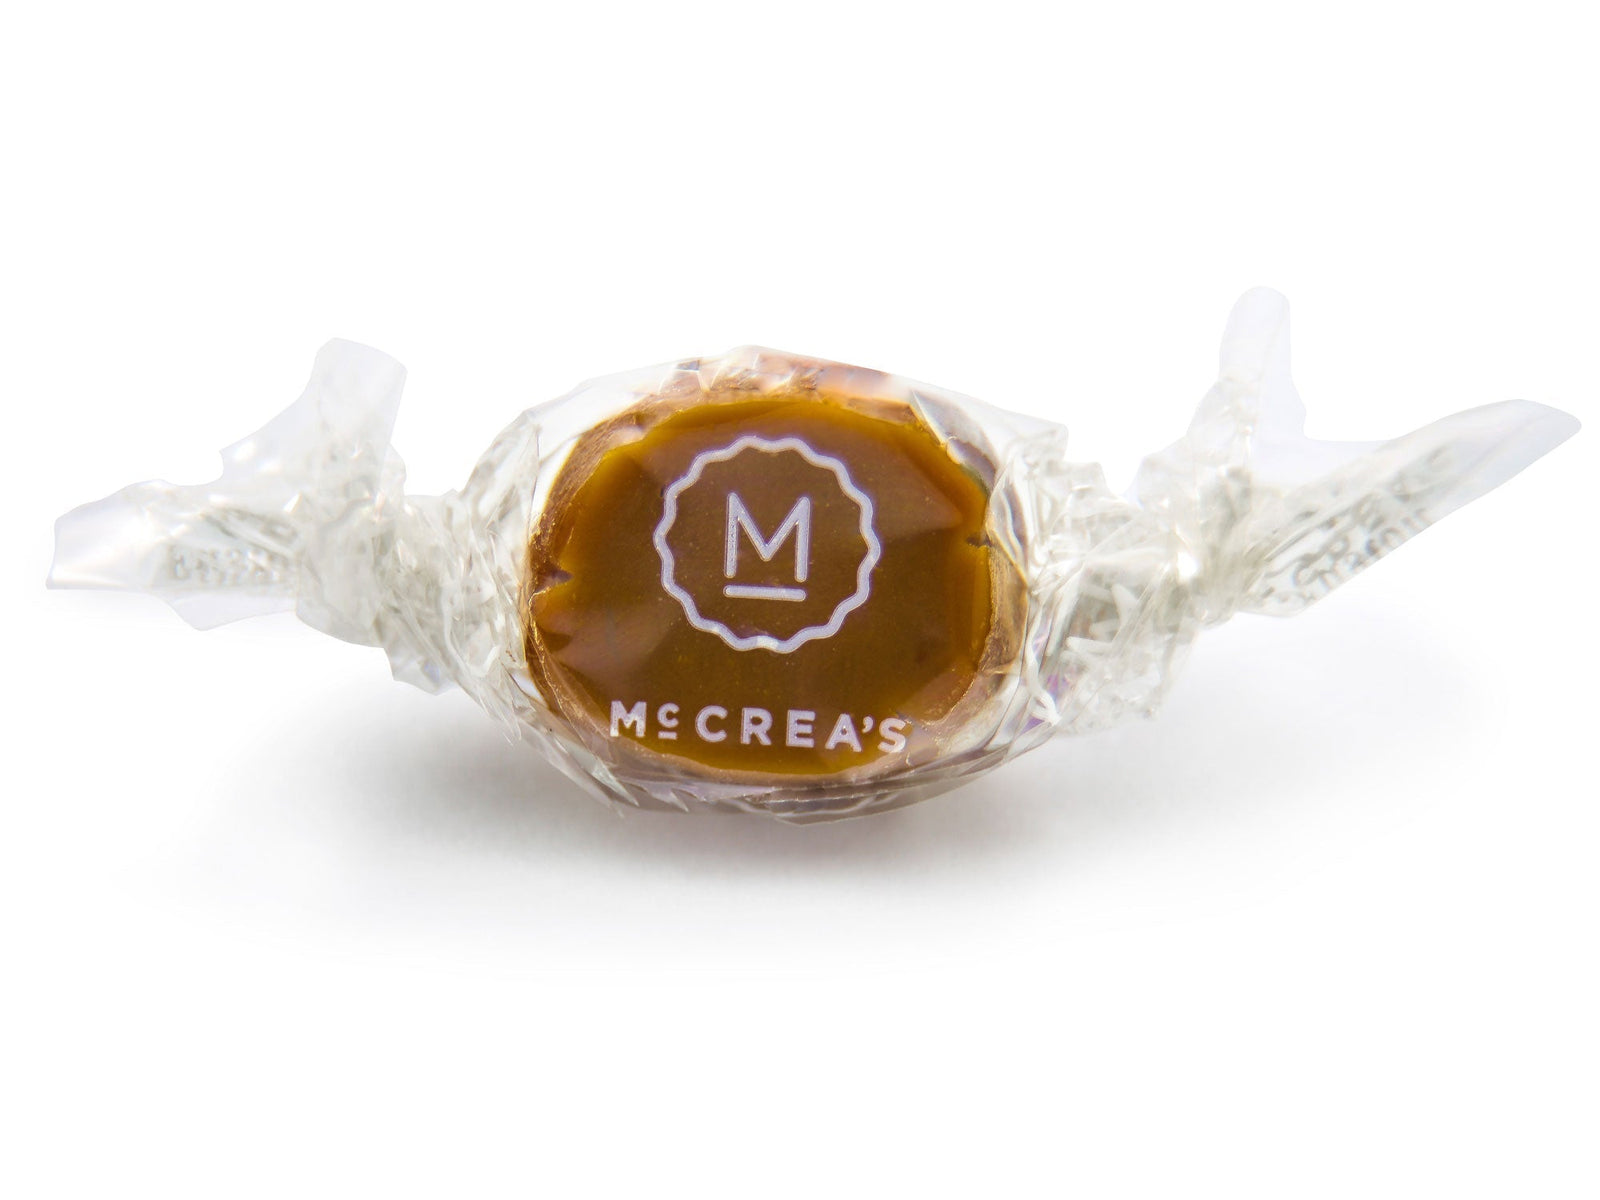 Deep Chocolate Caramels By Mccreas - Unboxme